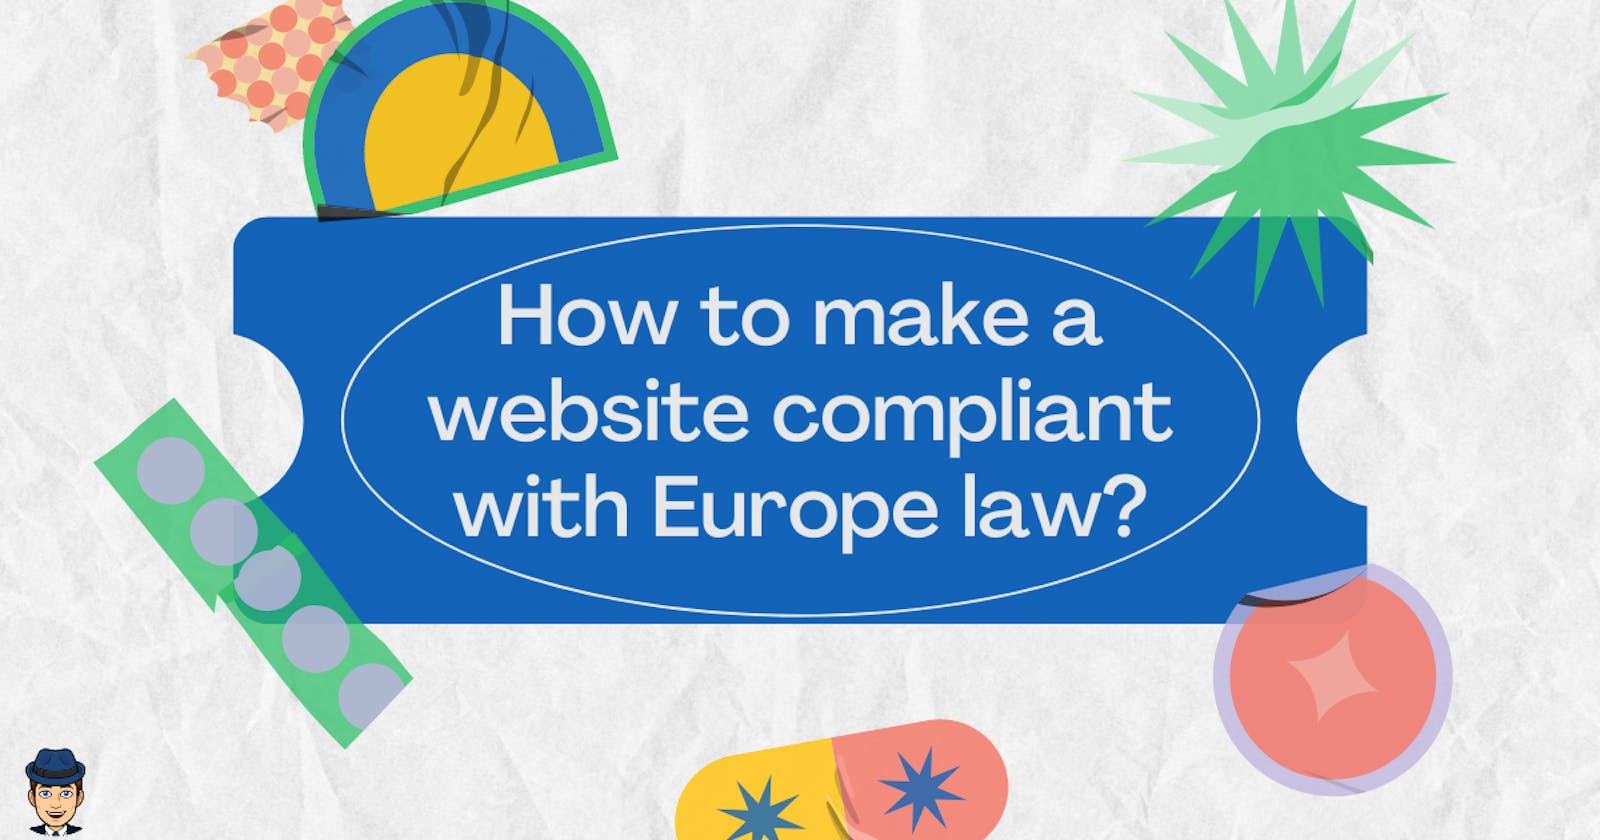 How to make a website compliant with Europe law?